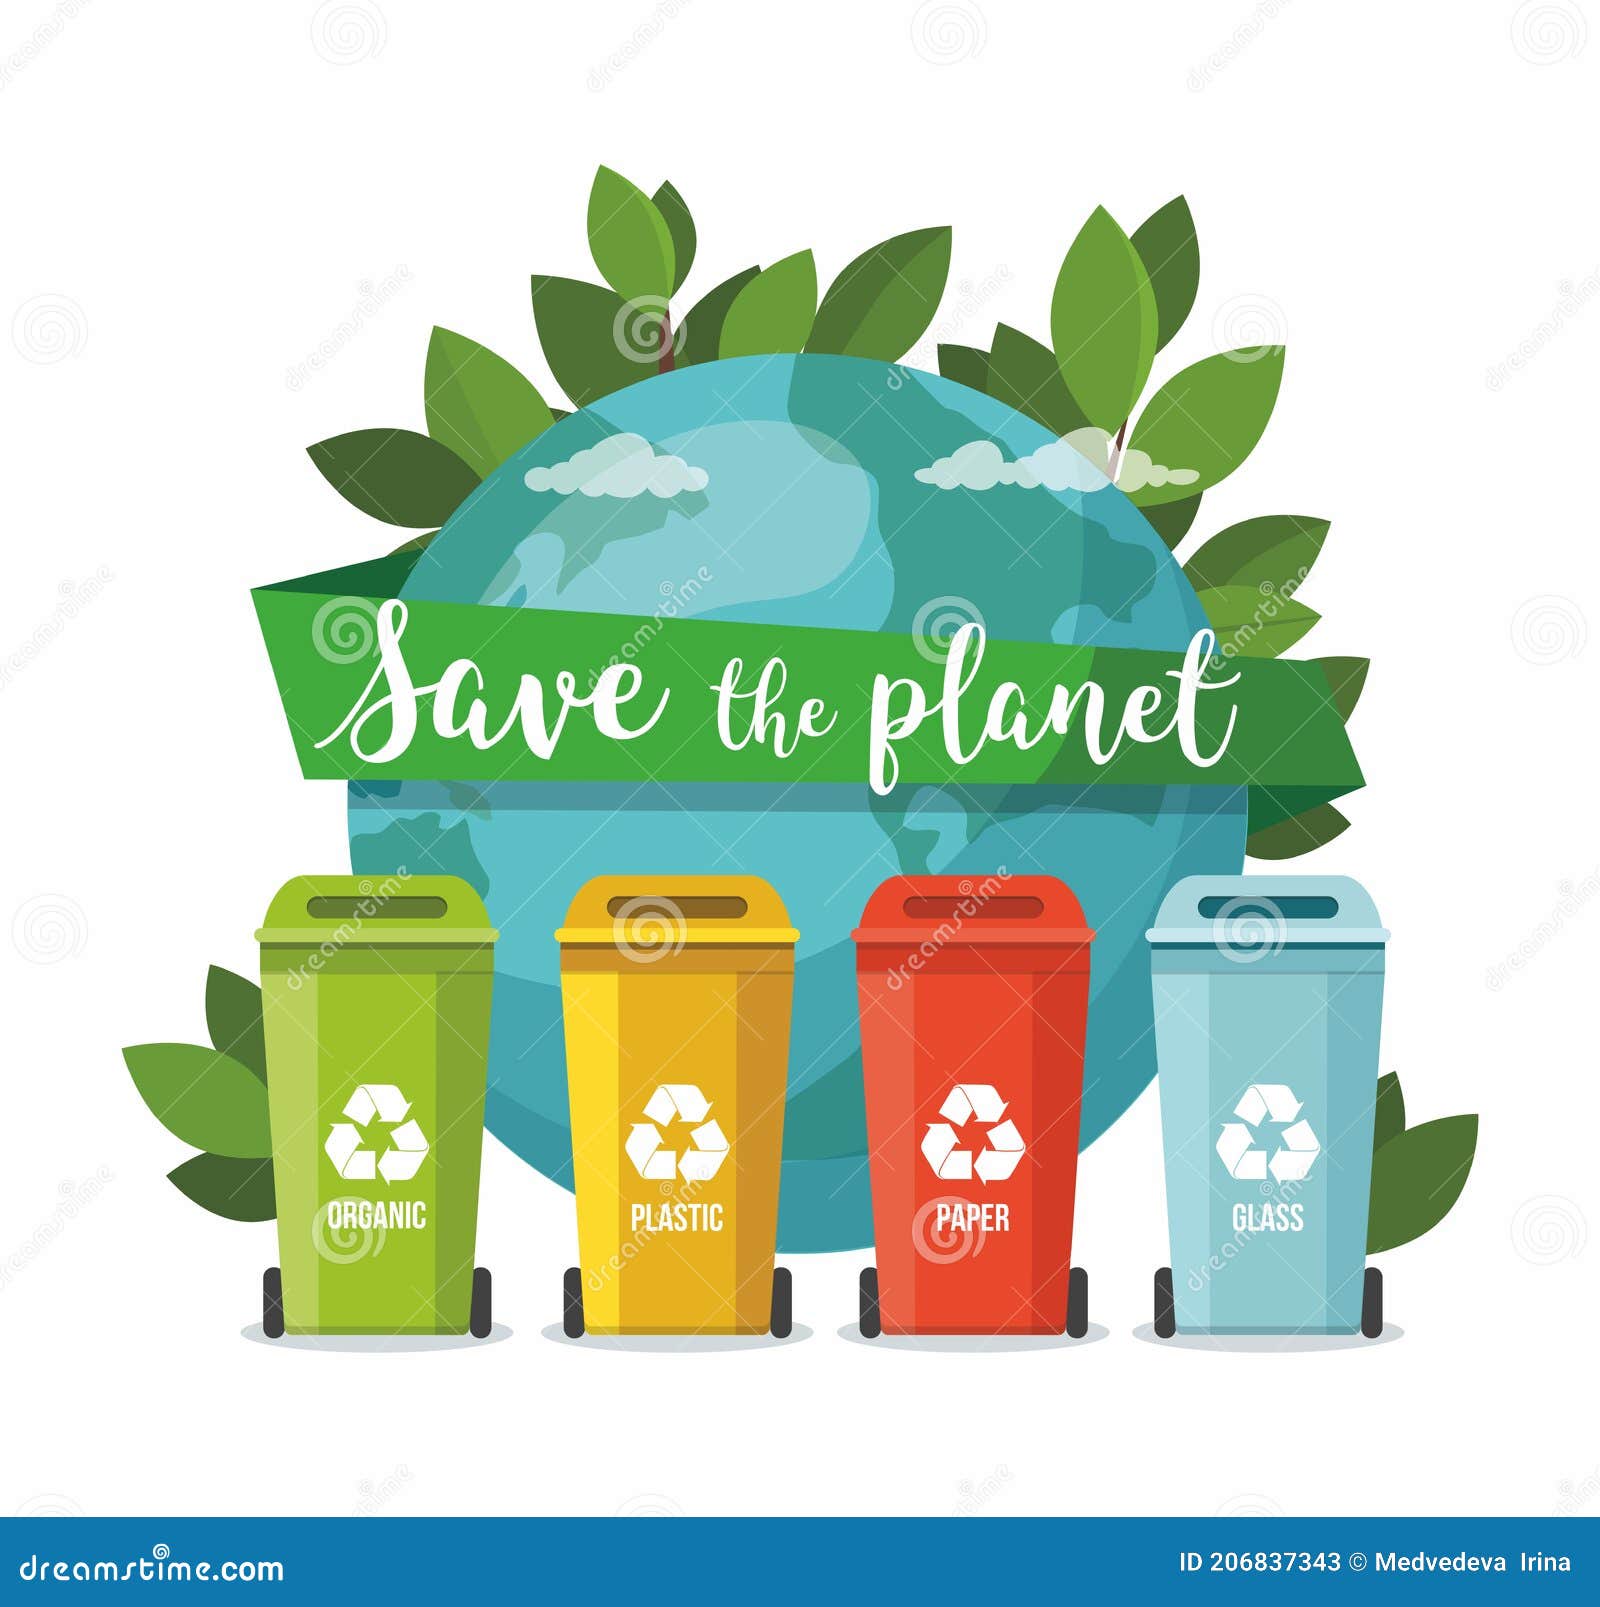 https://thumbs.dreamstime.com/z/waste-sorting-trash-containers-organic-e-waste-plastic-paper-glass-metal-trash-containers-recycling-garbage-waste-sorting-206837343.jpg